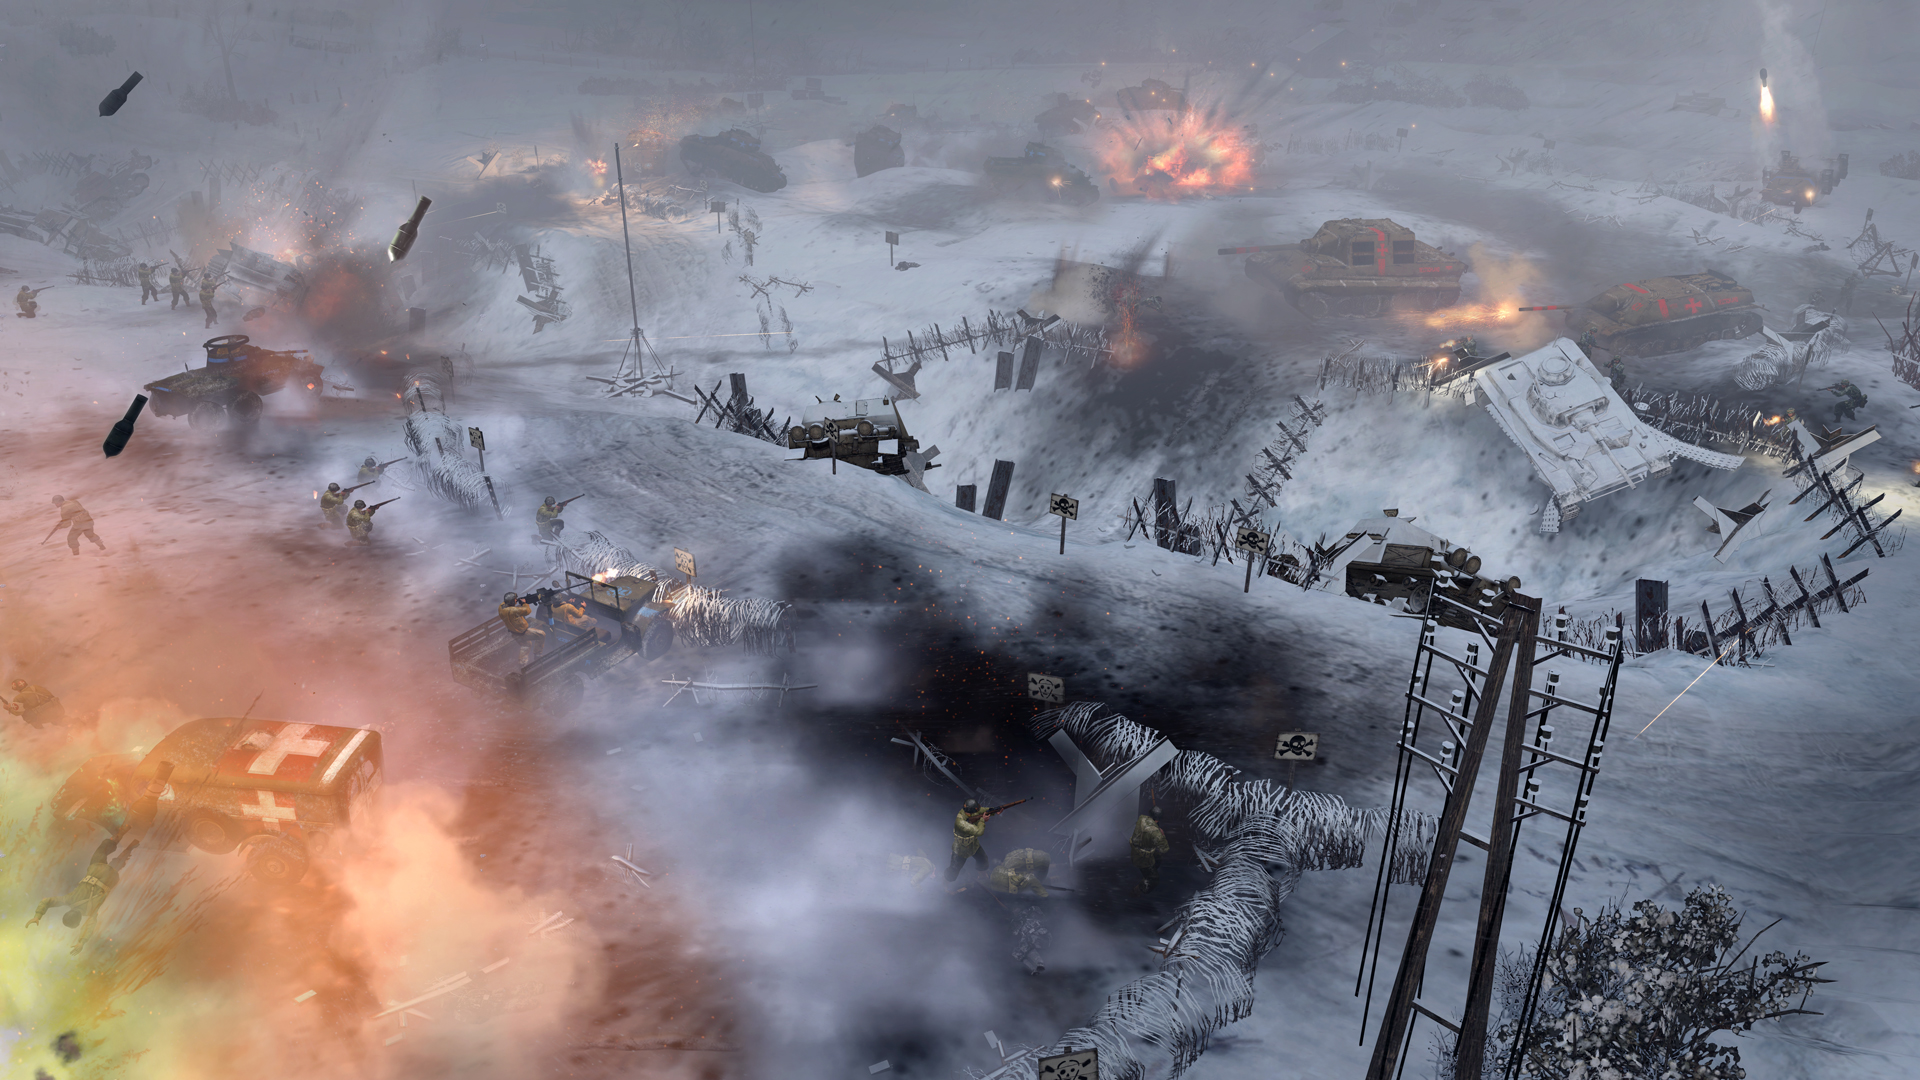 Ӣ2Company Of Heroes 2v3.0.0.9704޸GRIZZLY